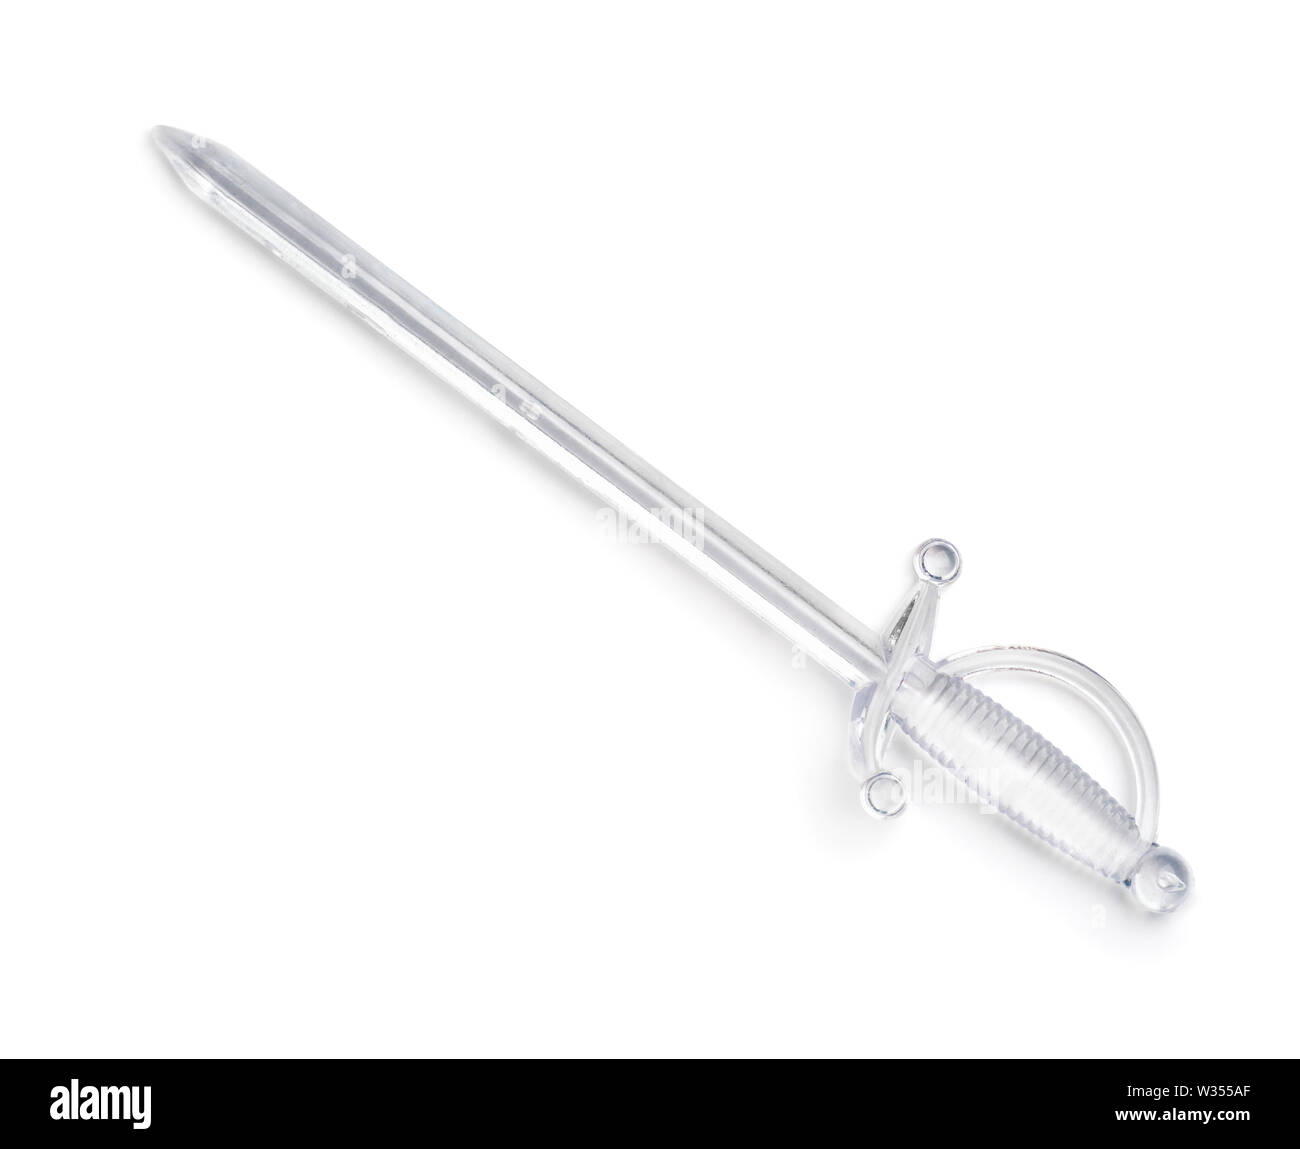 Top view of transparent plastic sword skewer isolated on white Stock Photo